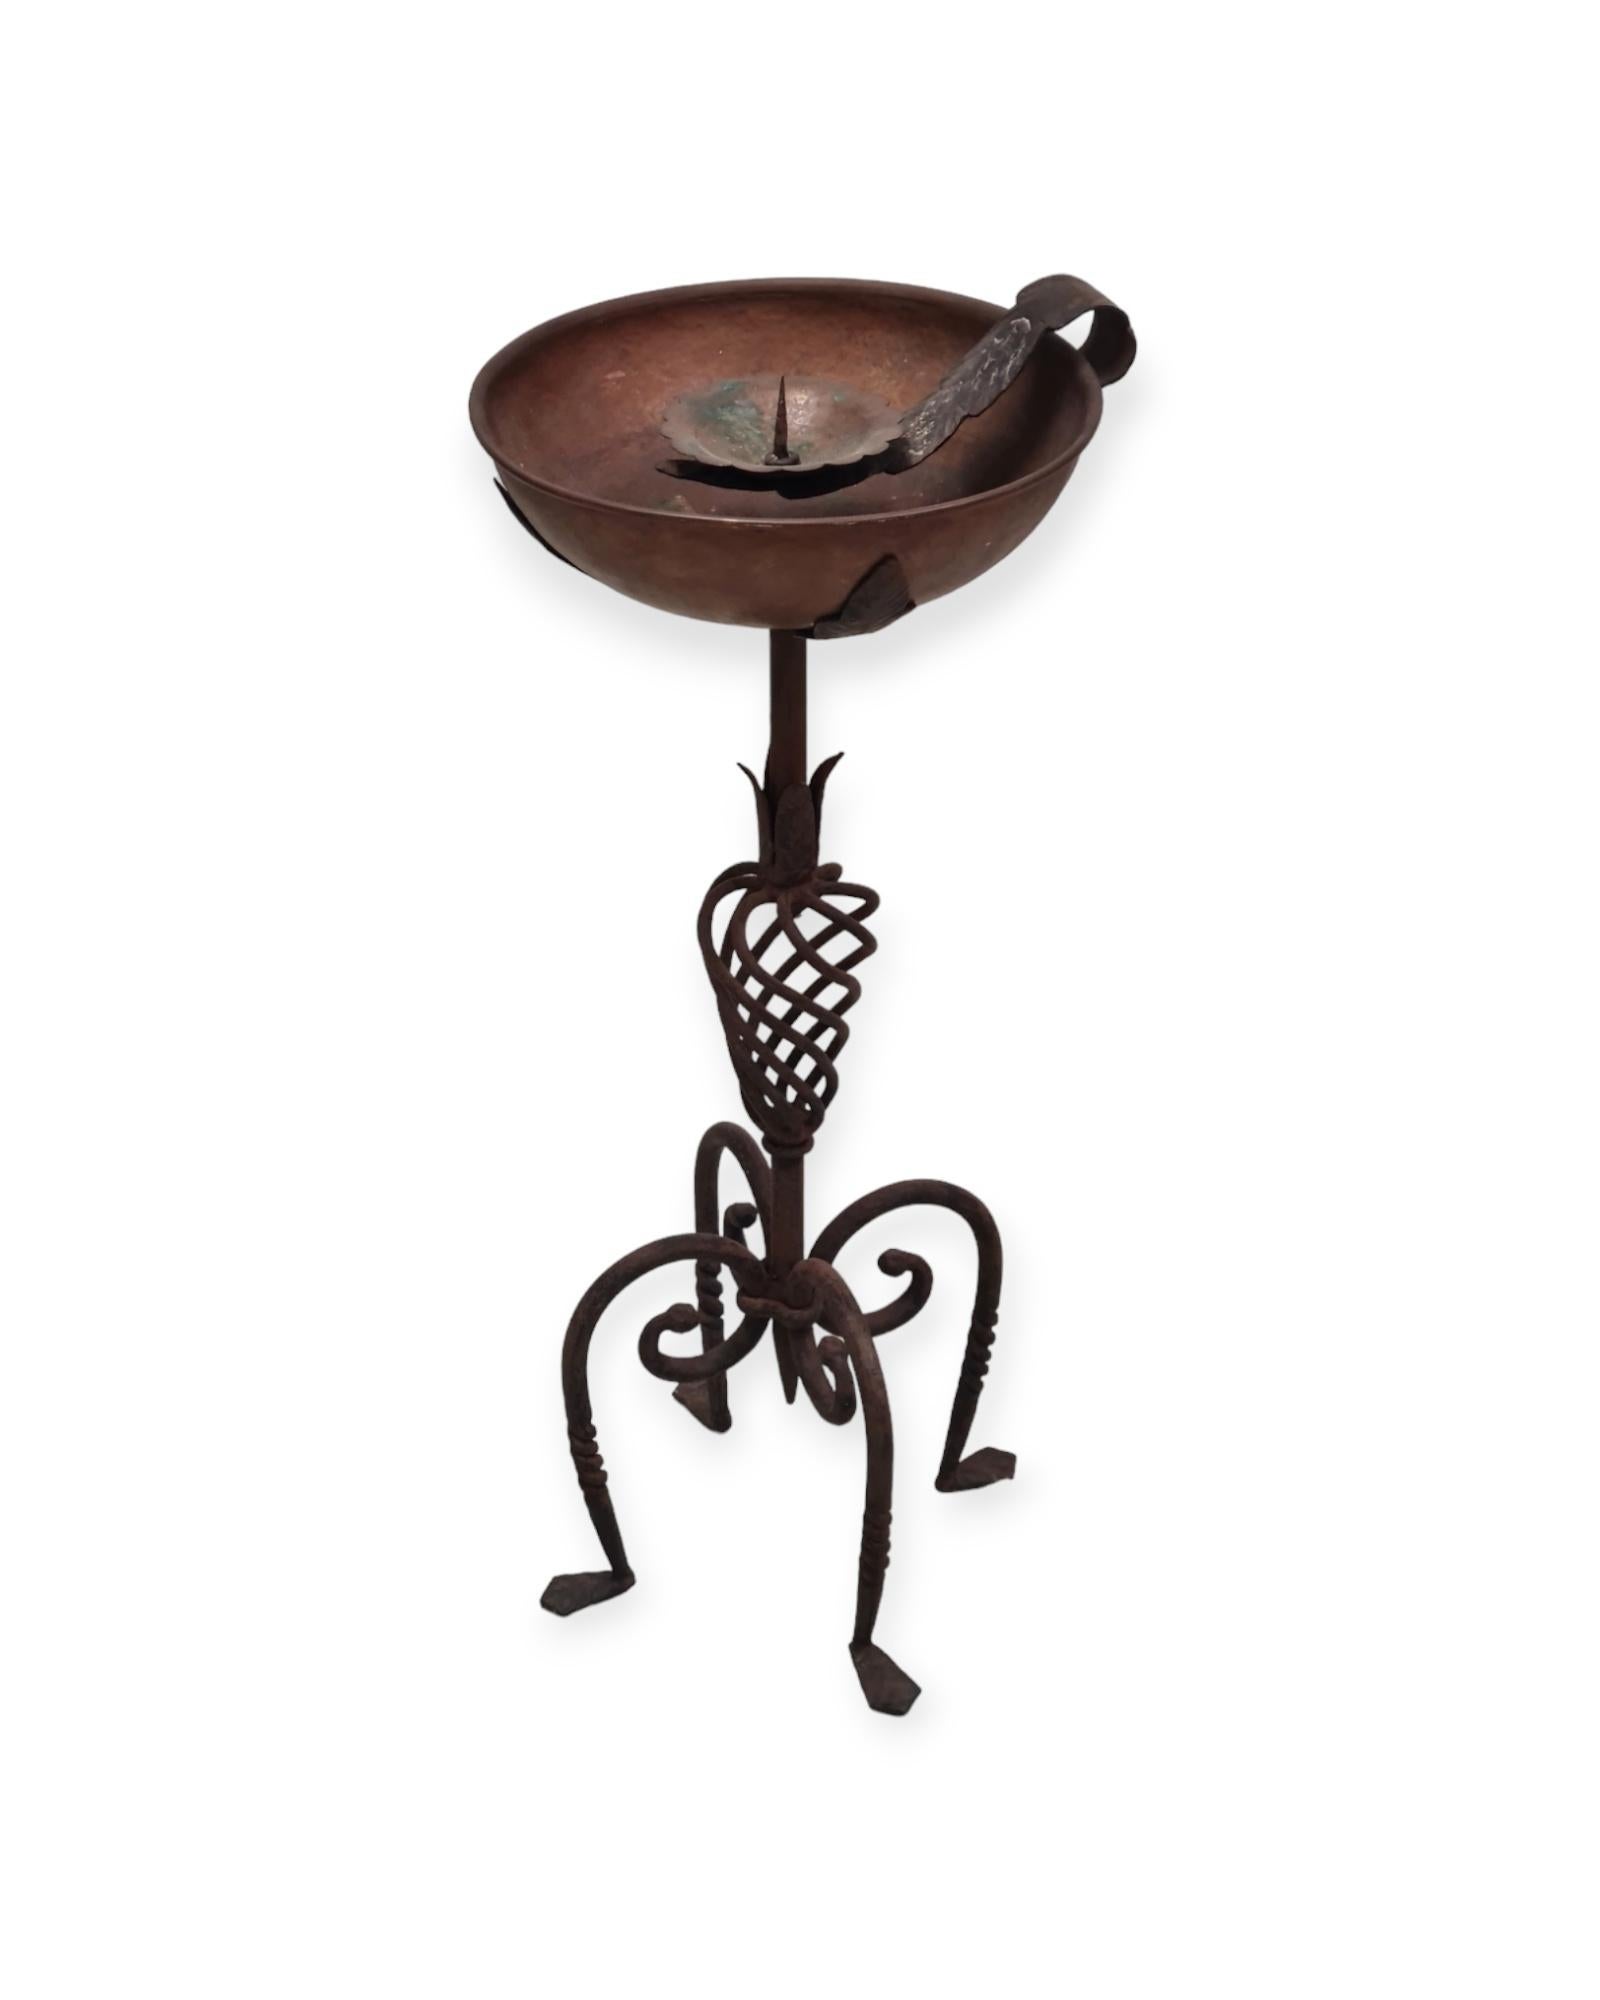 A beautiful torchére piece by the leading metal and wrought iron master Antti Hakkarainen made through his metal workshop Taidetakomo A. Hakkarainen. 
This candle holder is very rare and combines an iron decorative stand with a copper dish to